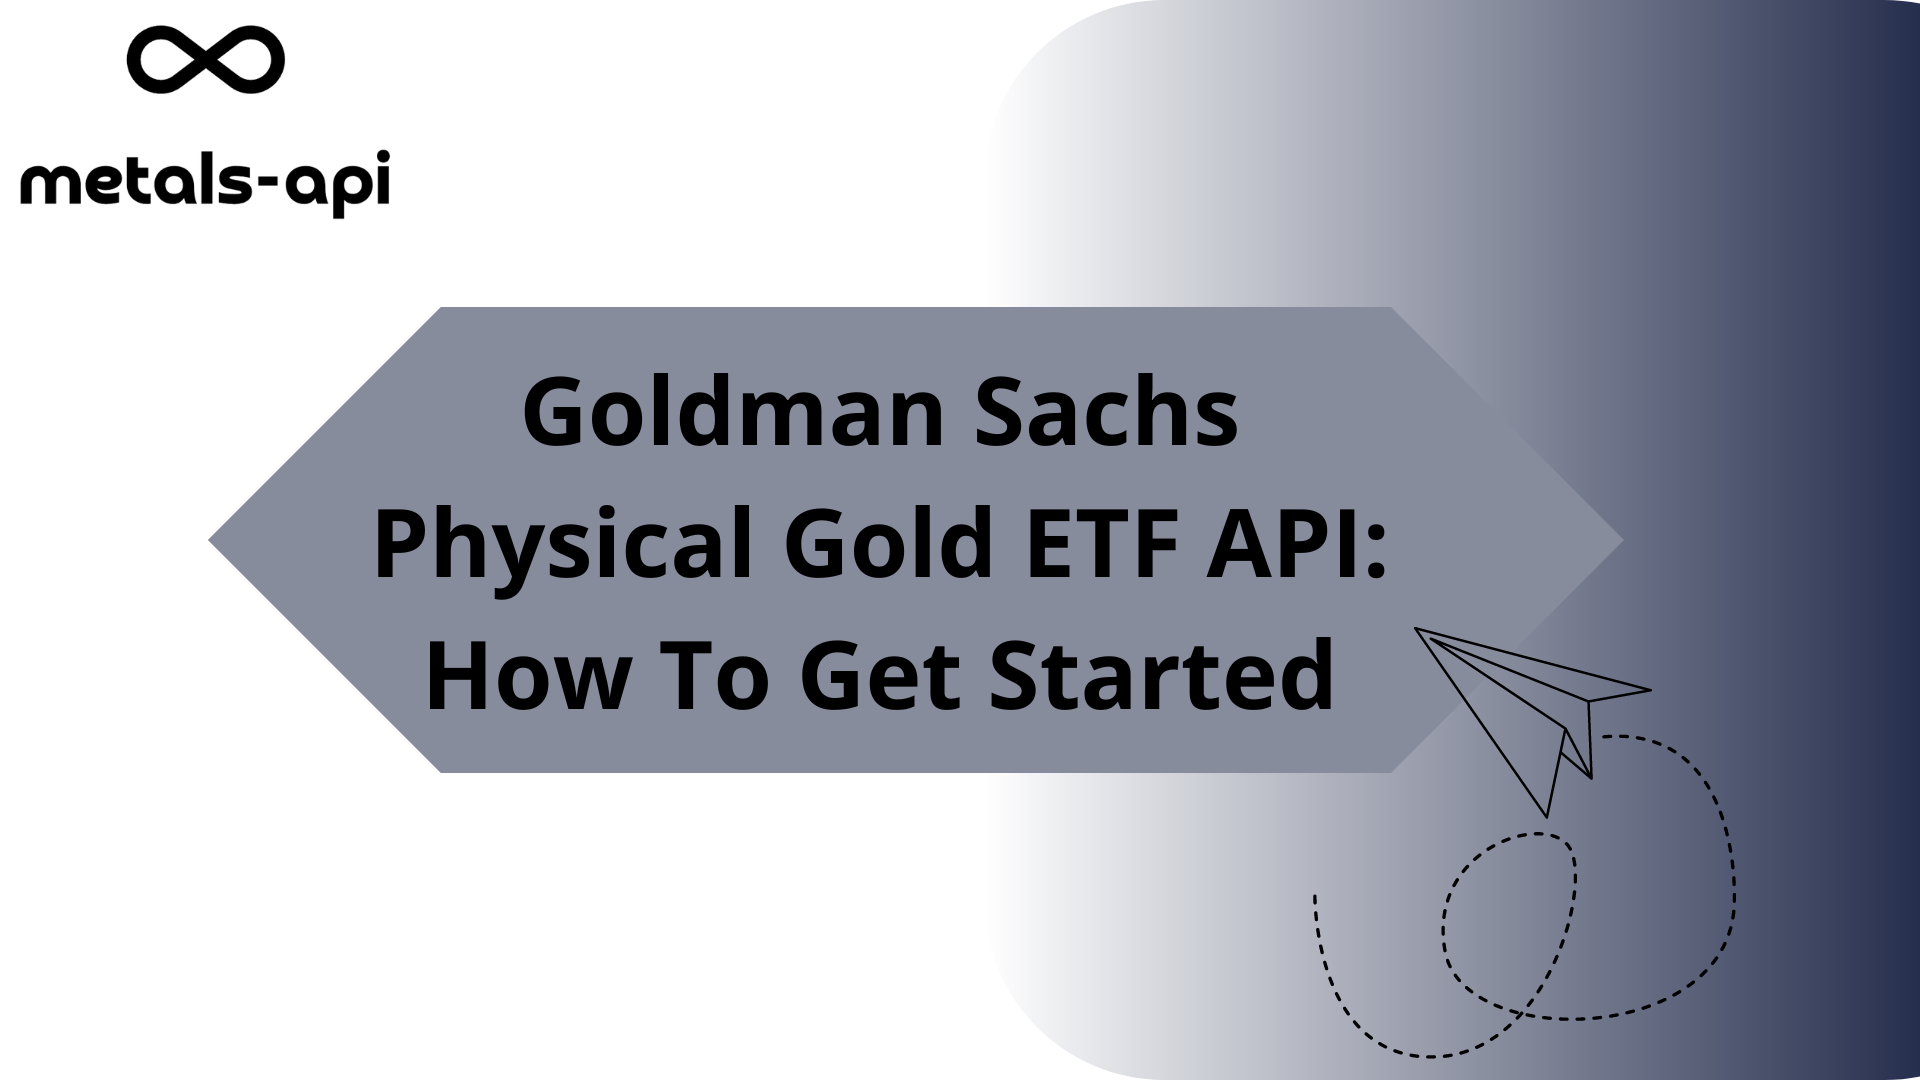 Goldman Sachs Physical Gold ETF API: How To Get Started